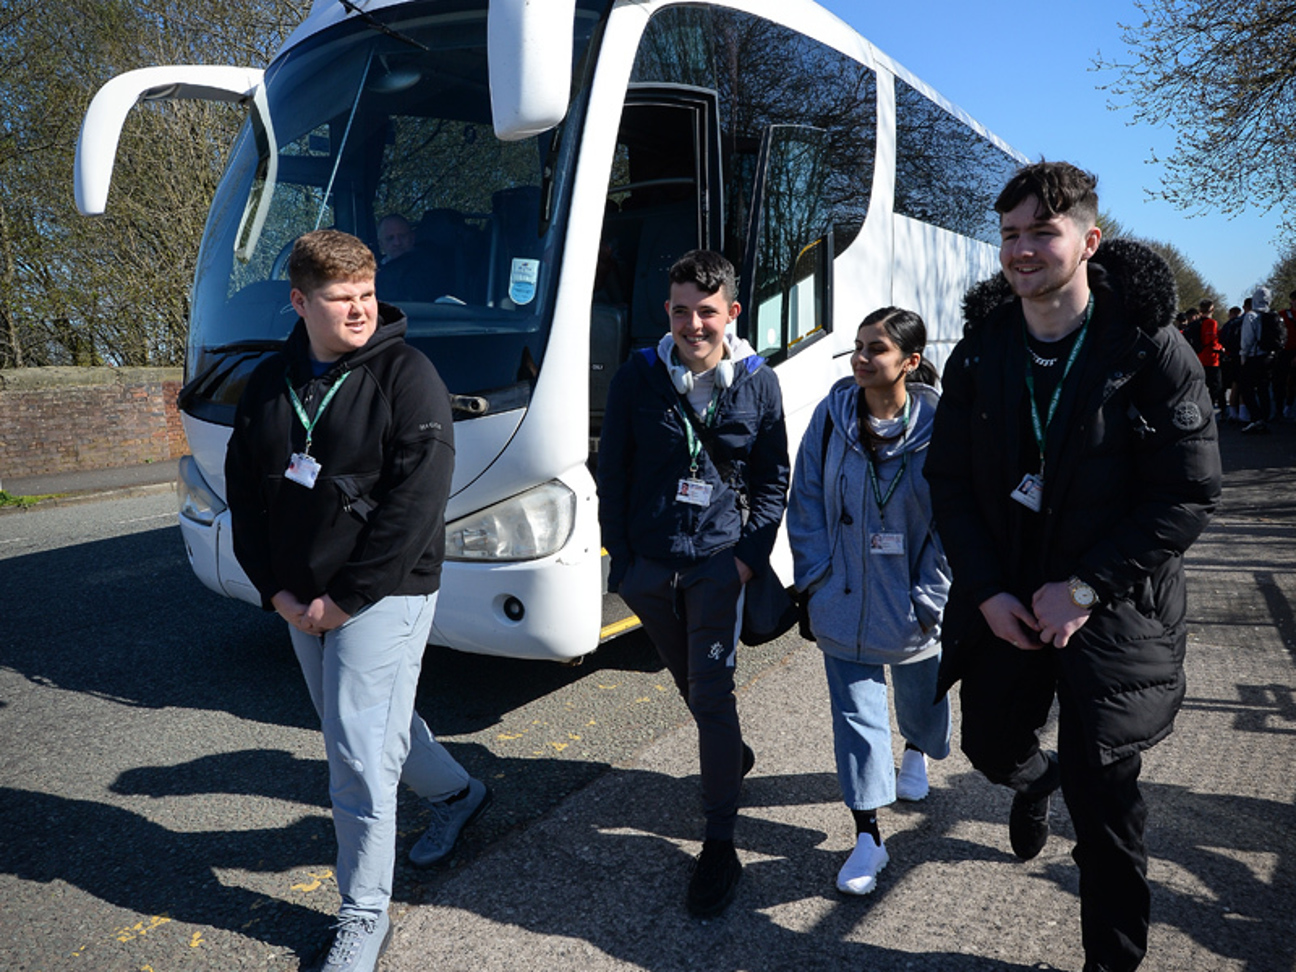 Students travelling to Bury College